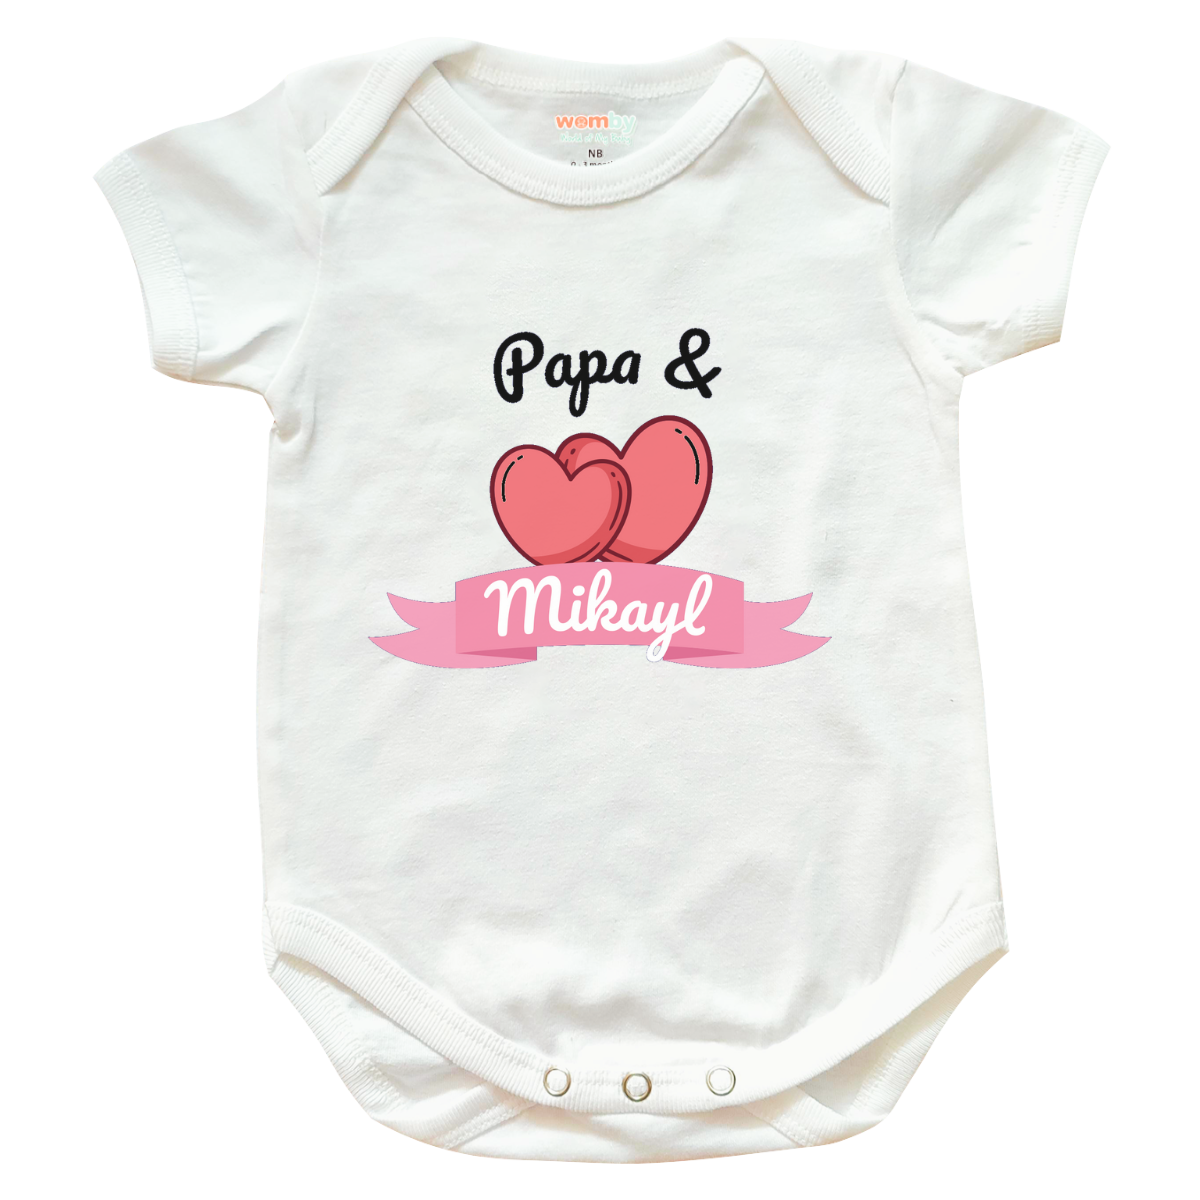 Papa & Name - Baby Rompers Full Cotton